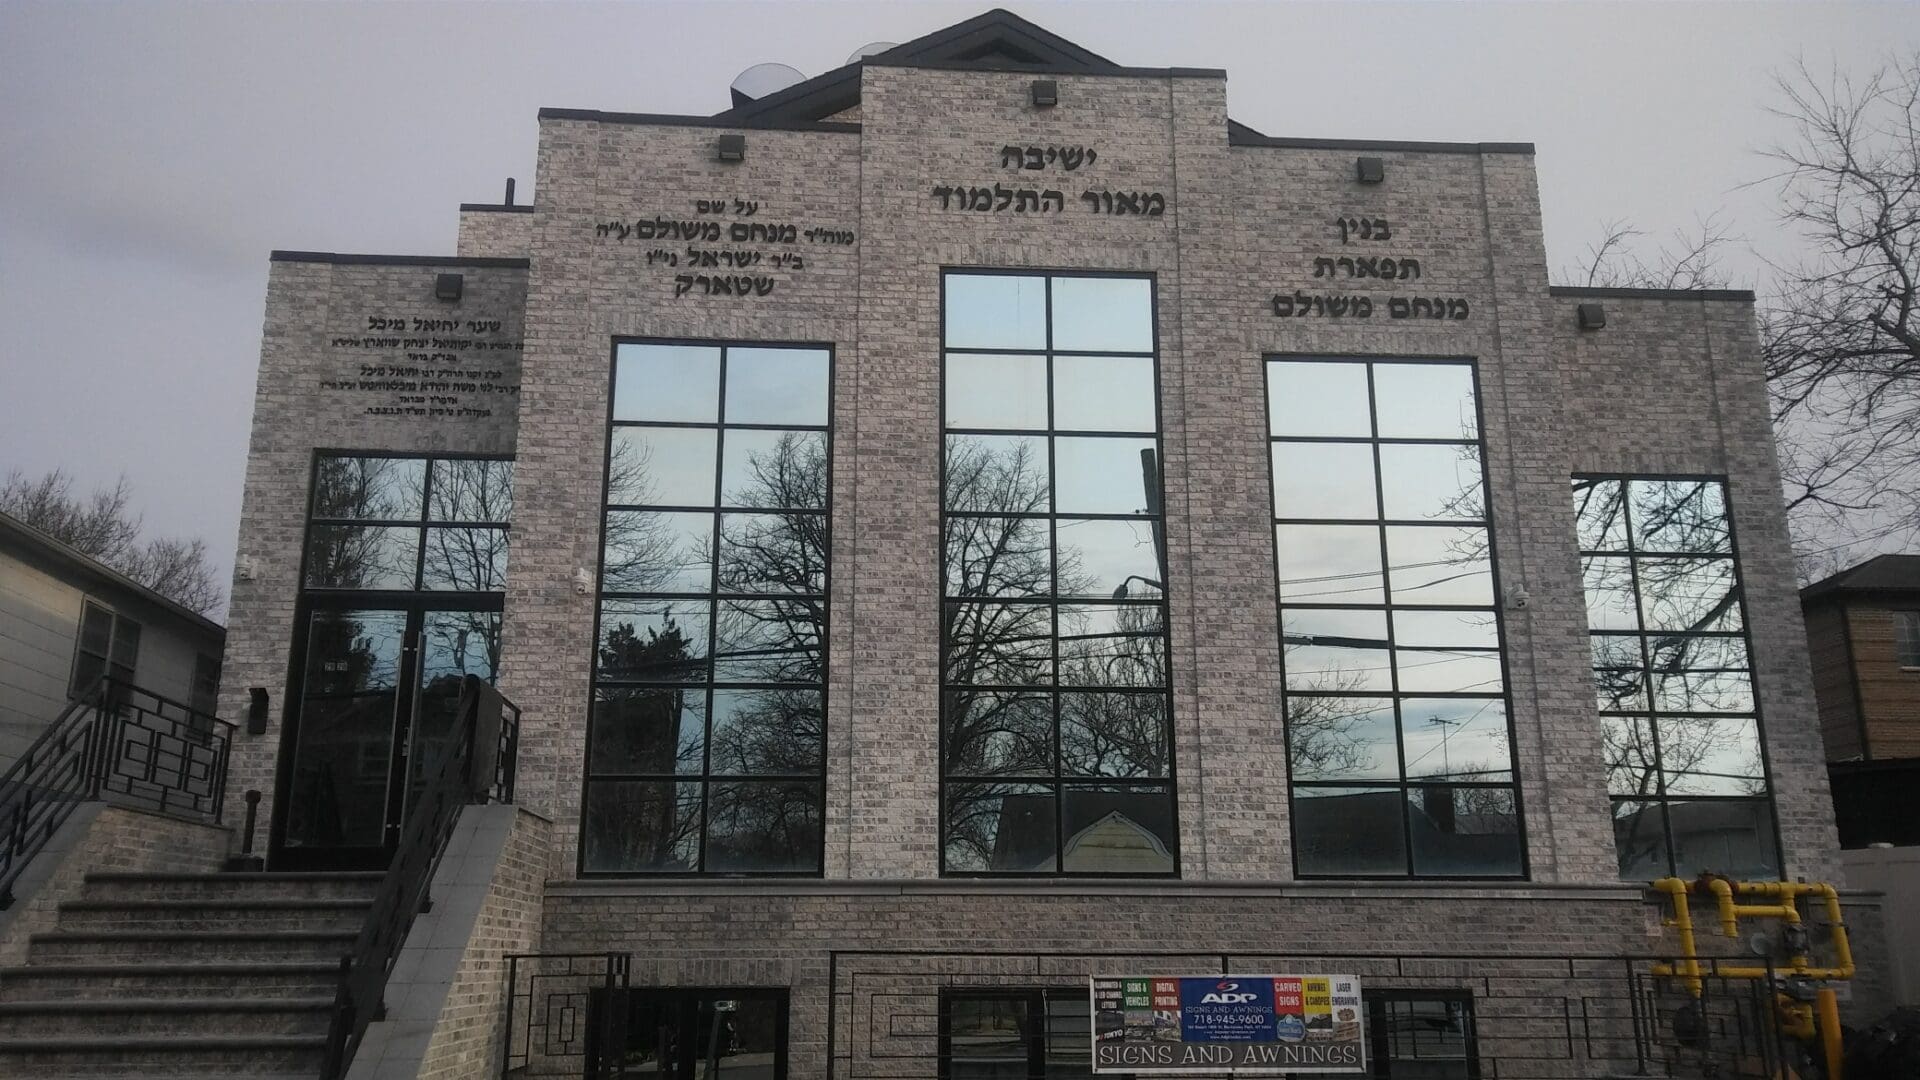 Exterior of a modern stone building with large windows, featuring Hebrew inscriptions and architectural symmetry, part of the ADP USA Solutions Gallery.